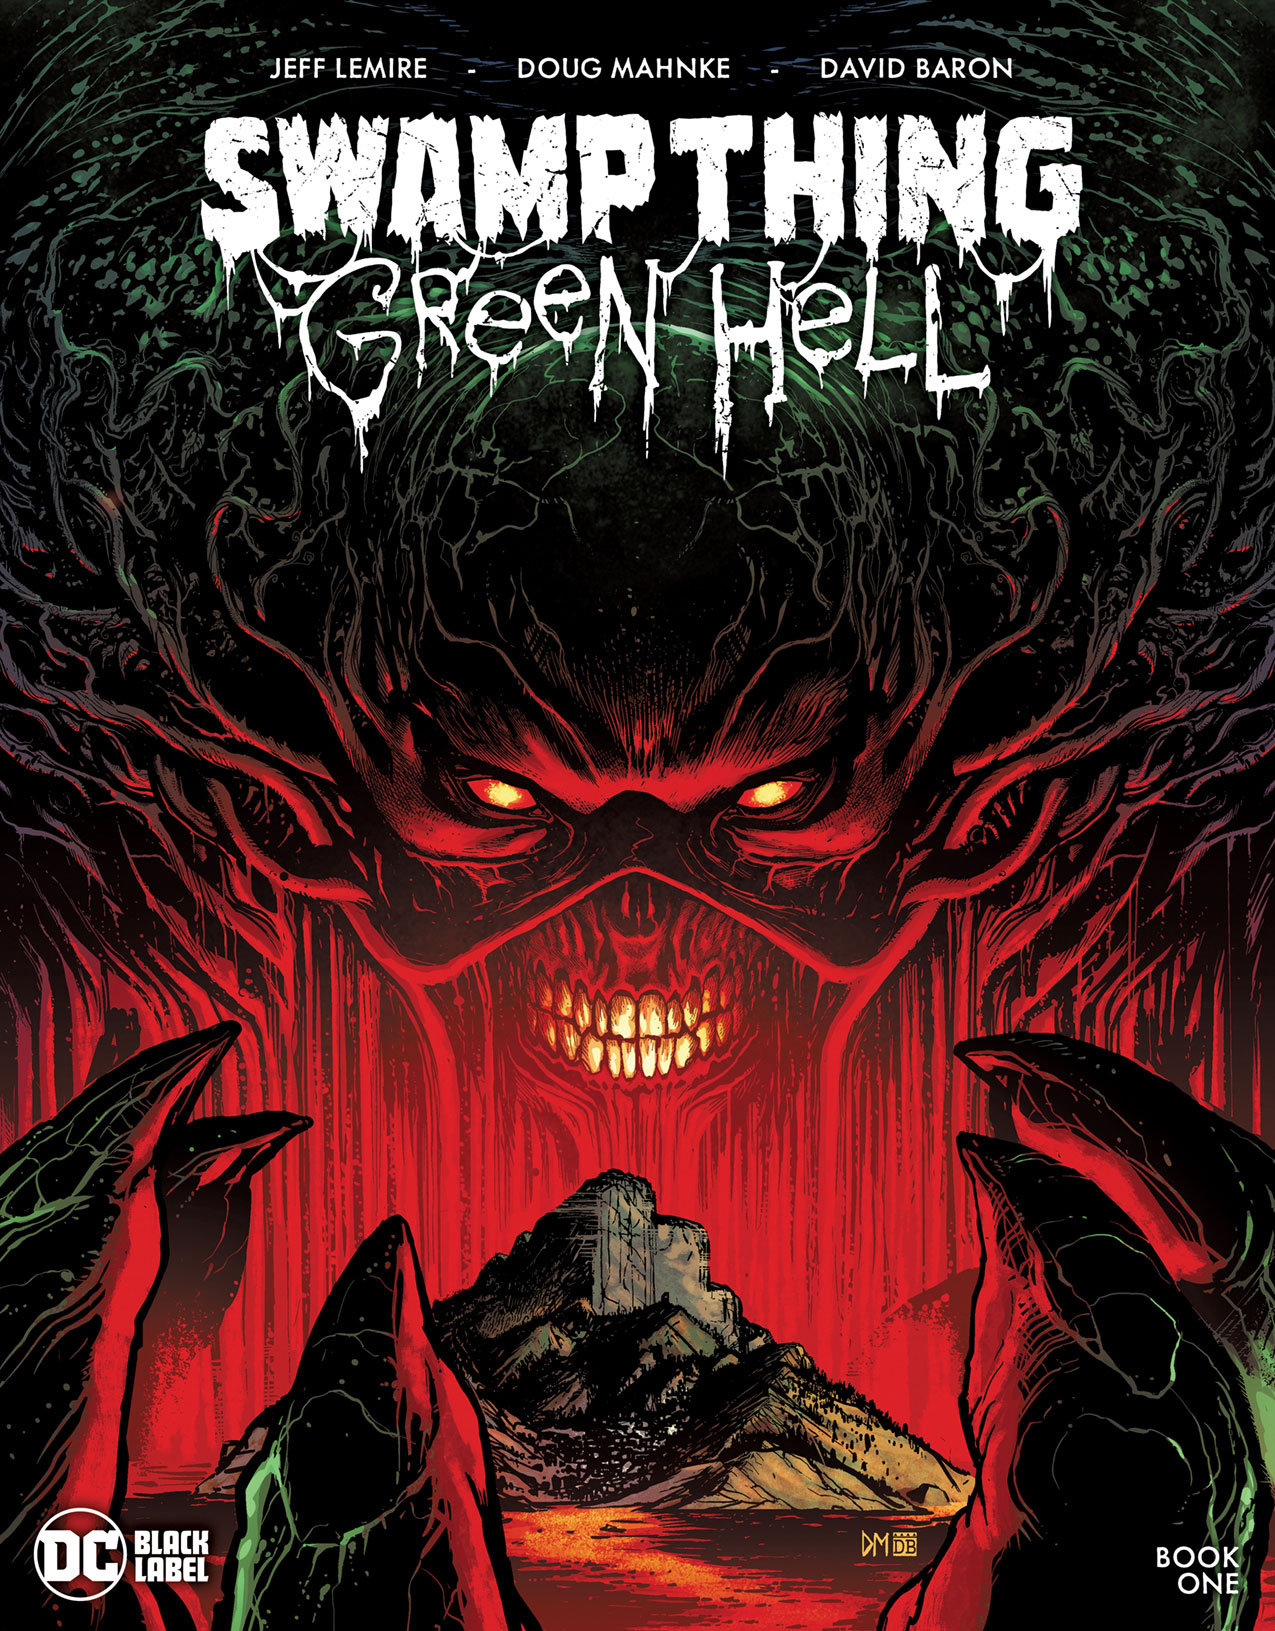 Swamp Thing Green Hell # 1 cover by Doug Mahnke